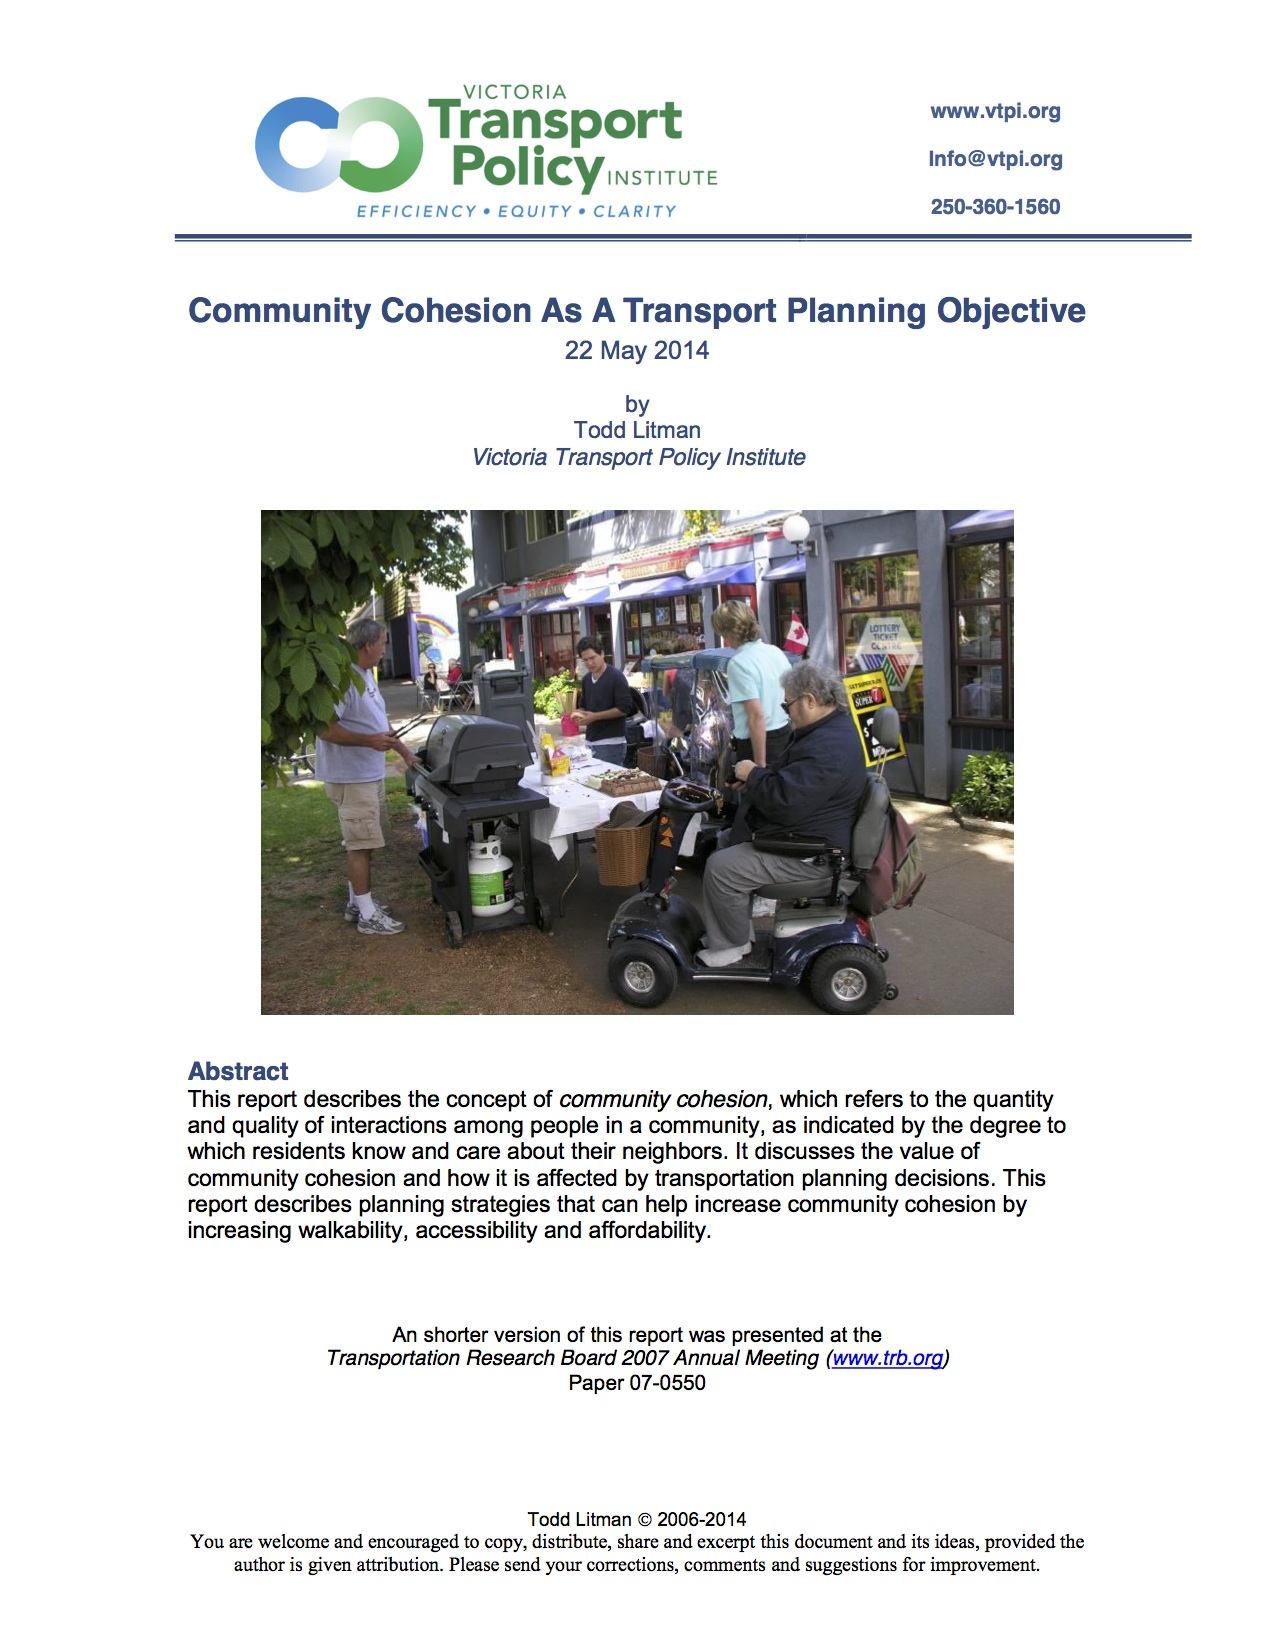 Community Cohesion As A Transport Planning Objective